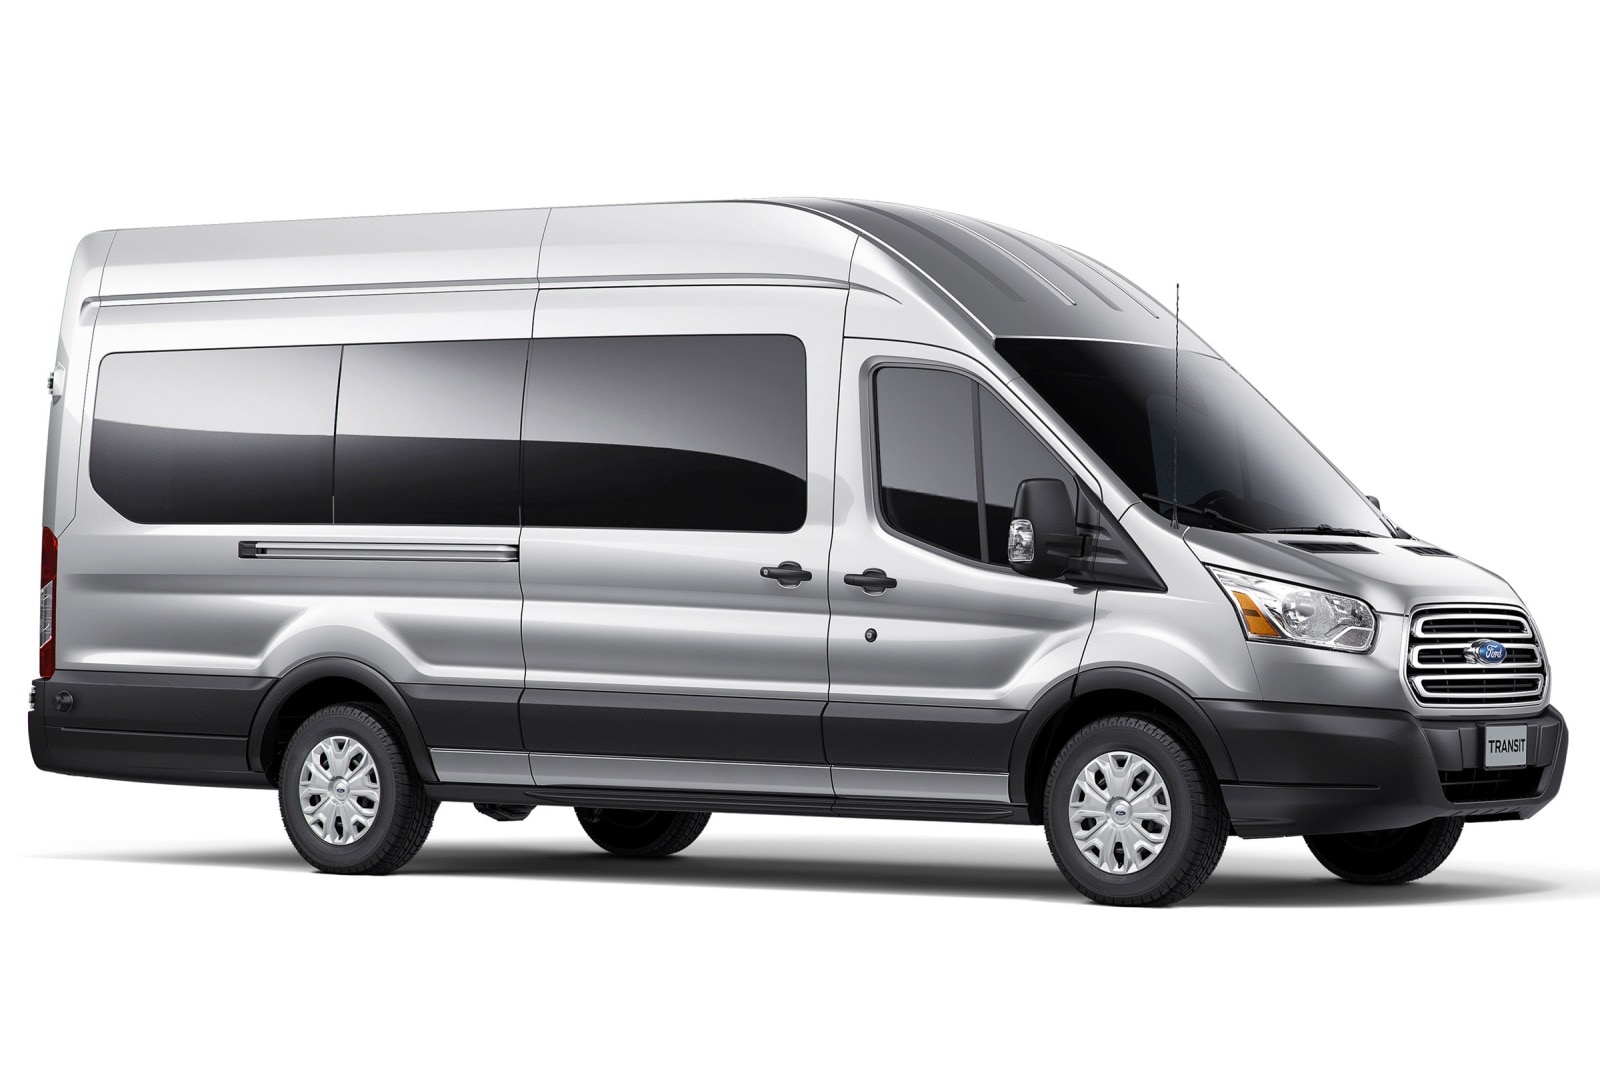 2016 Ford Transit Wagon Review & Ratings | Edmunds